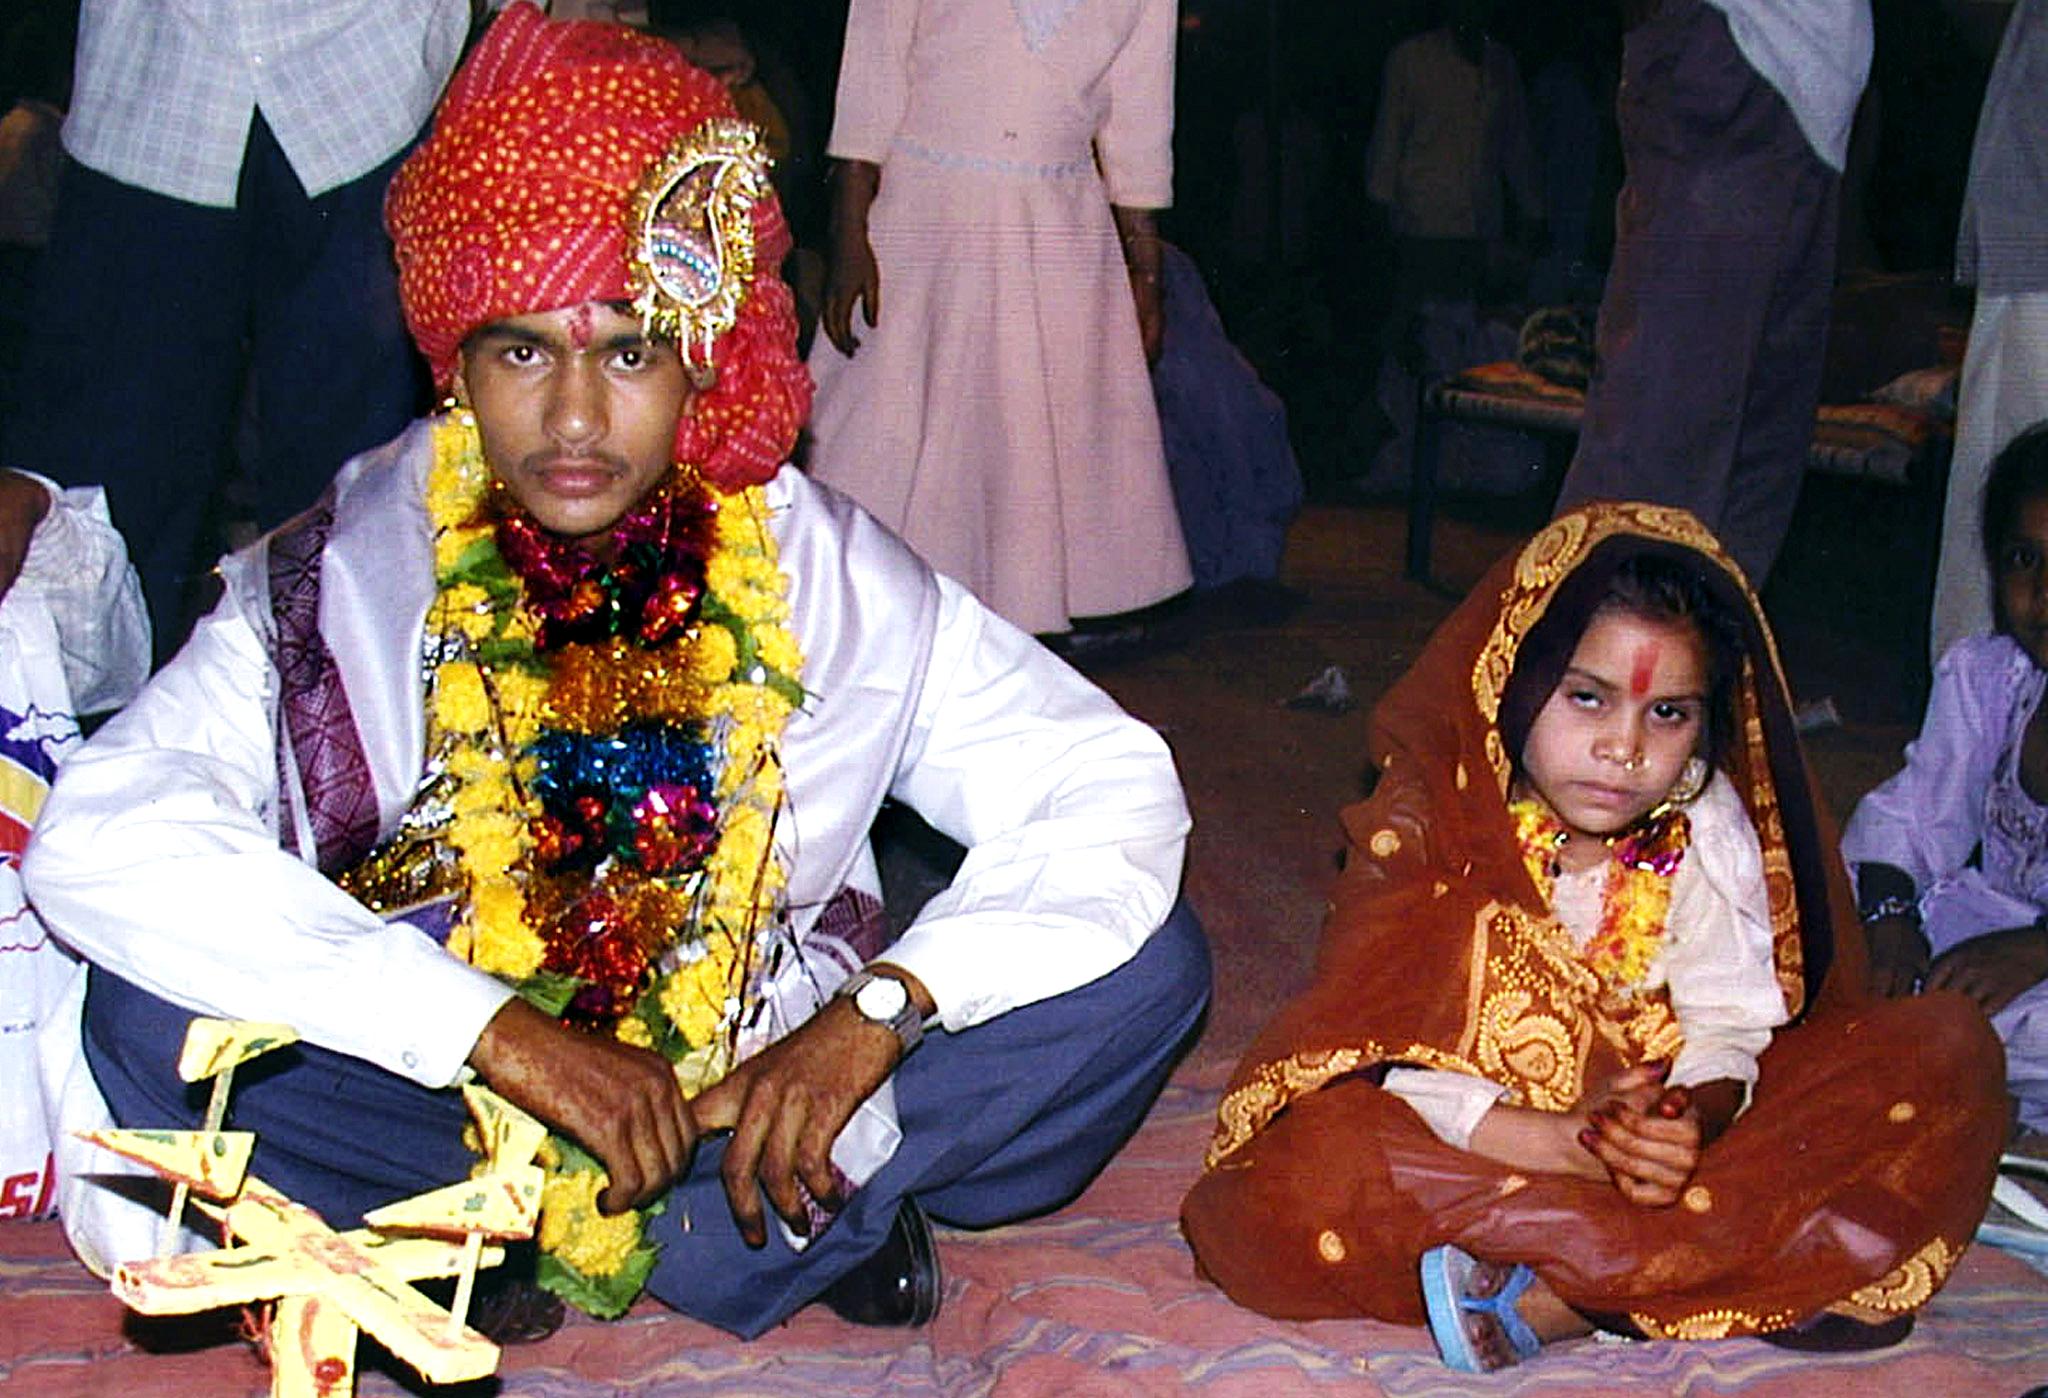 File: India saw a 50% rise in child marriages in 2020, according to the country’s national crime data